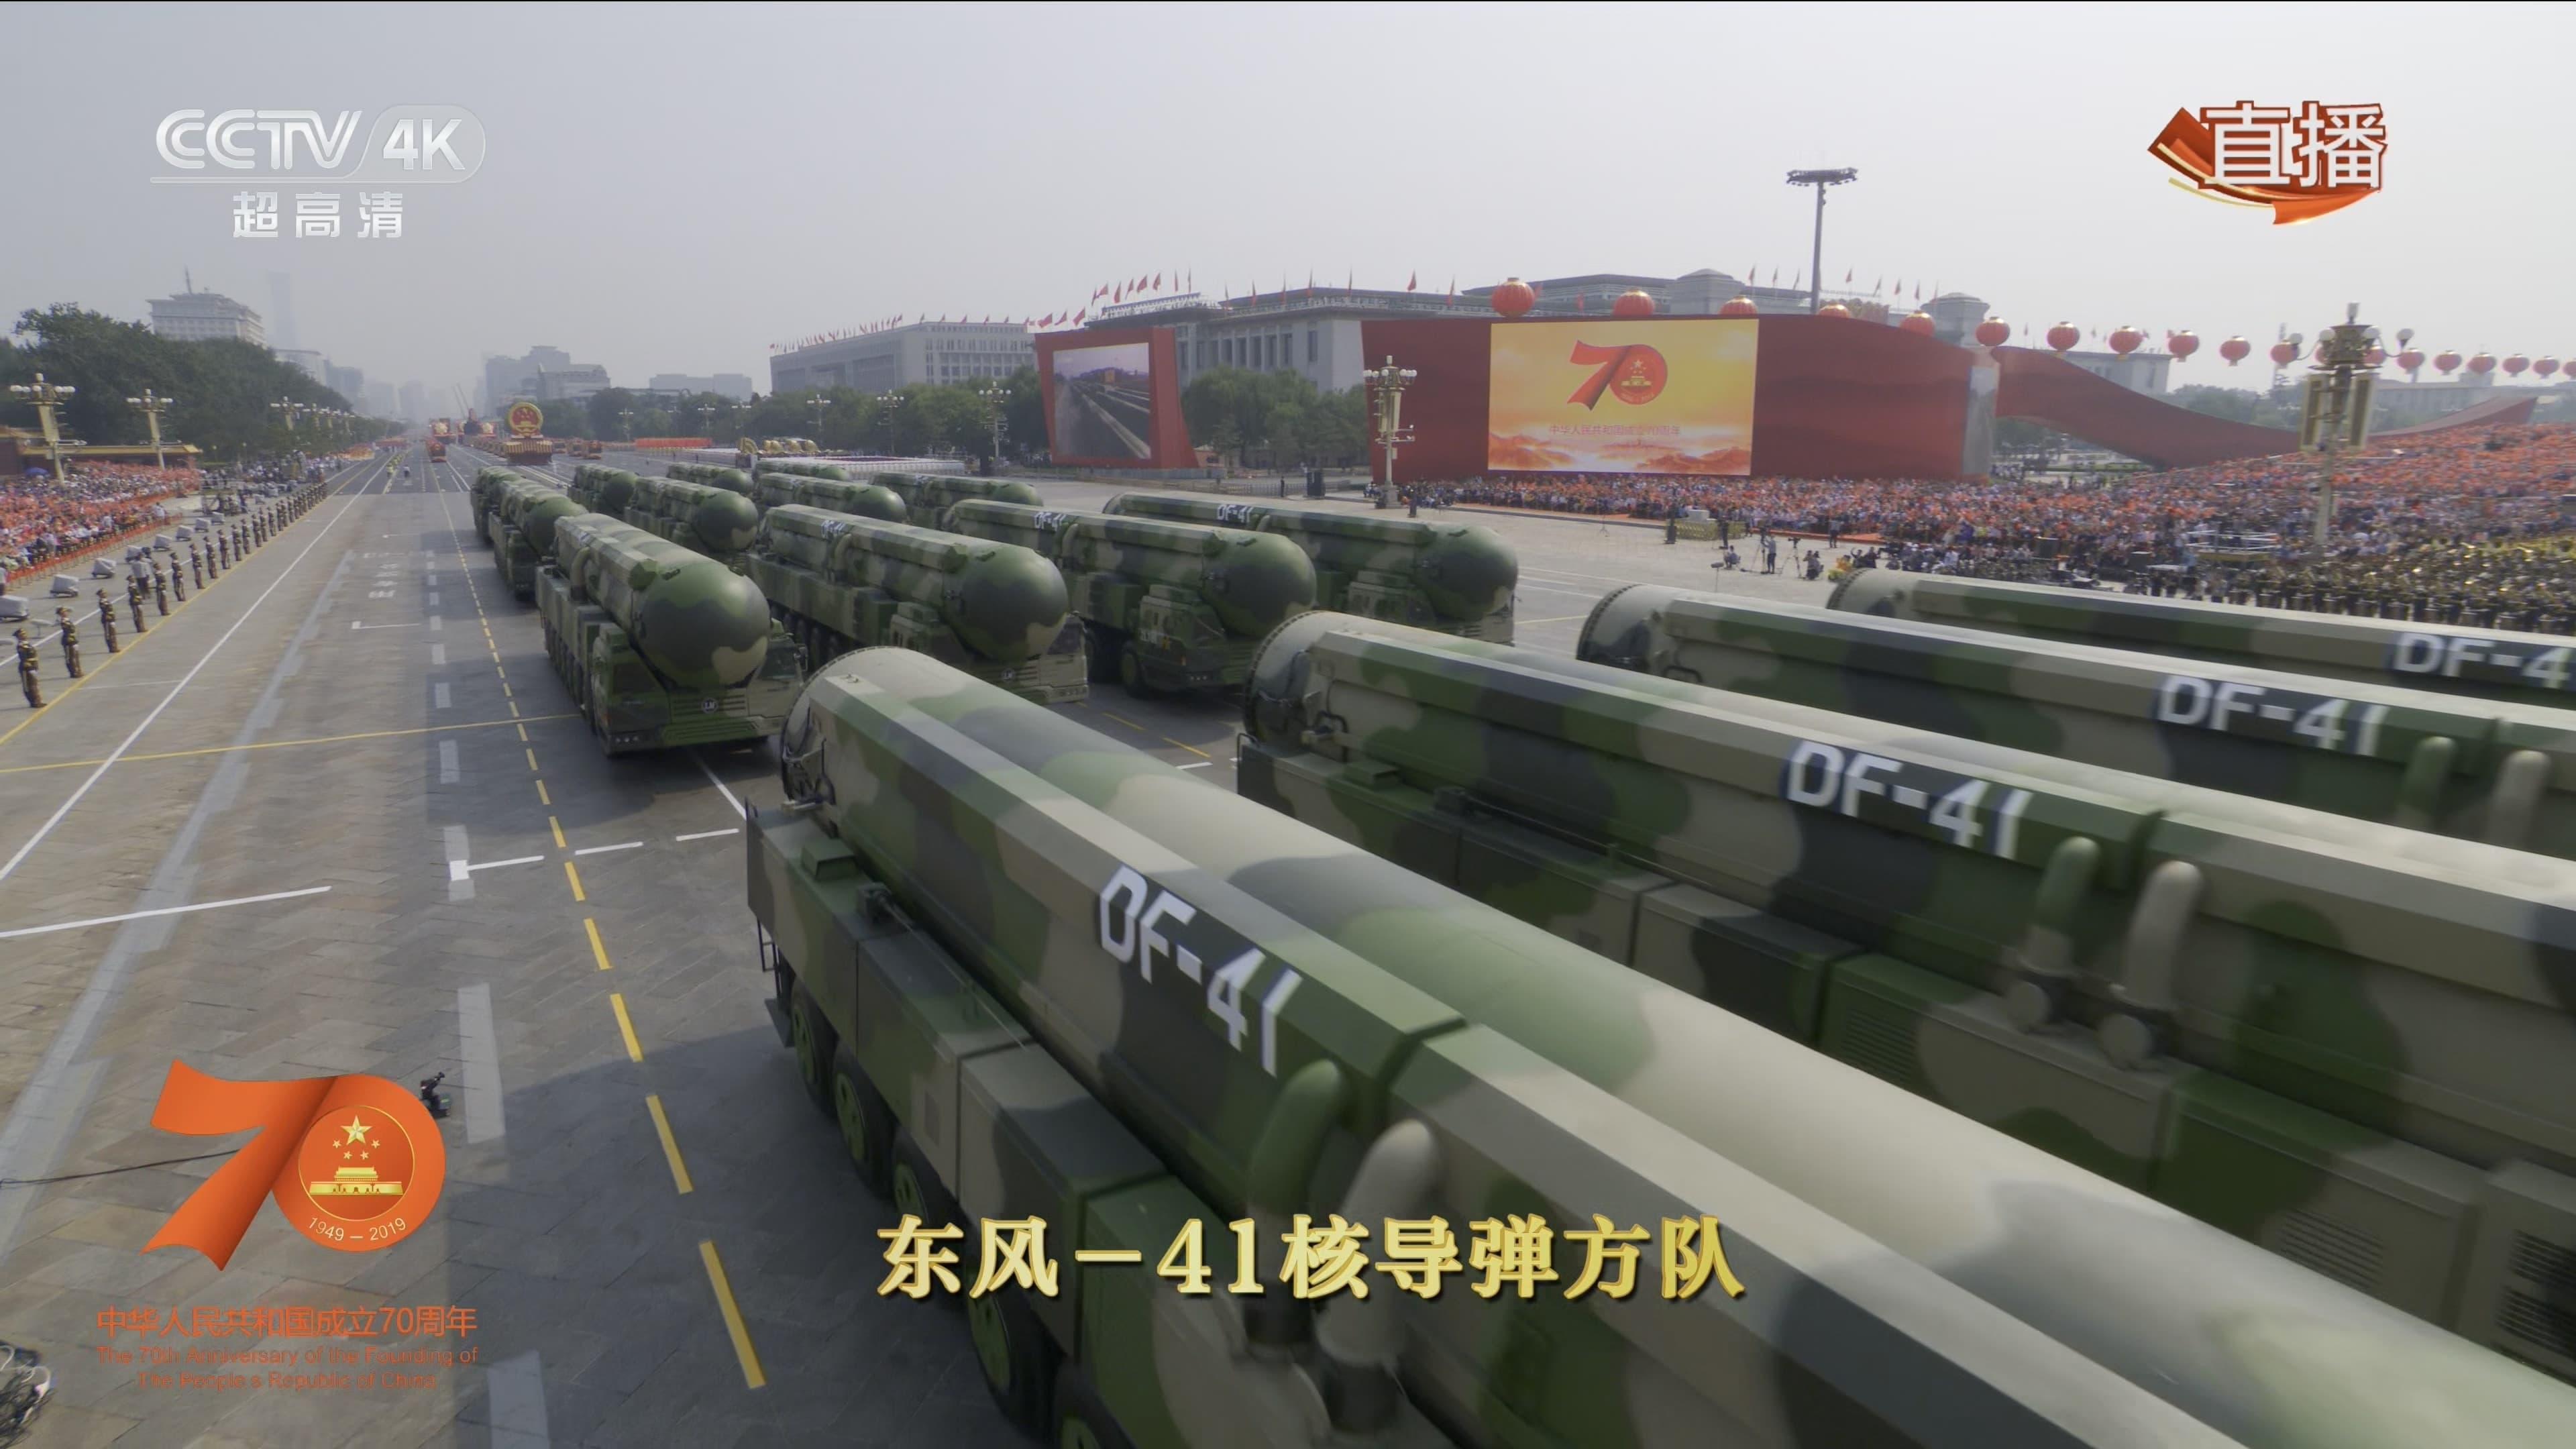 When China Wows the World: The 2019 Grand Military Parade backdrop